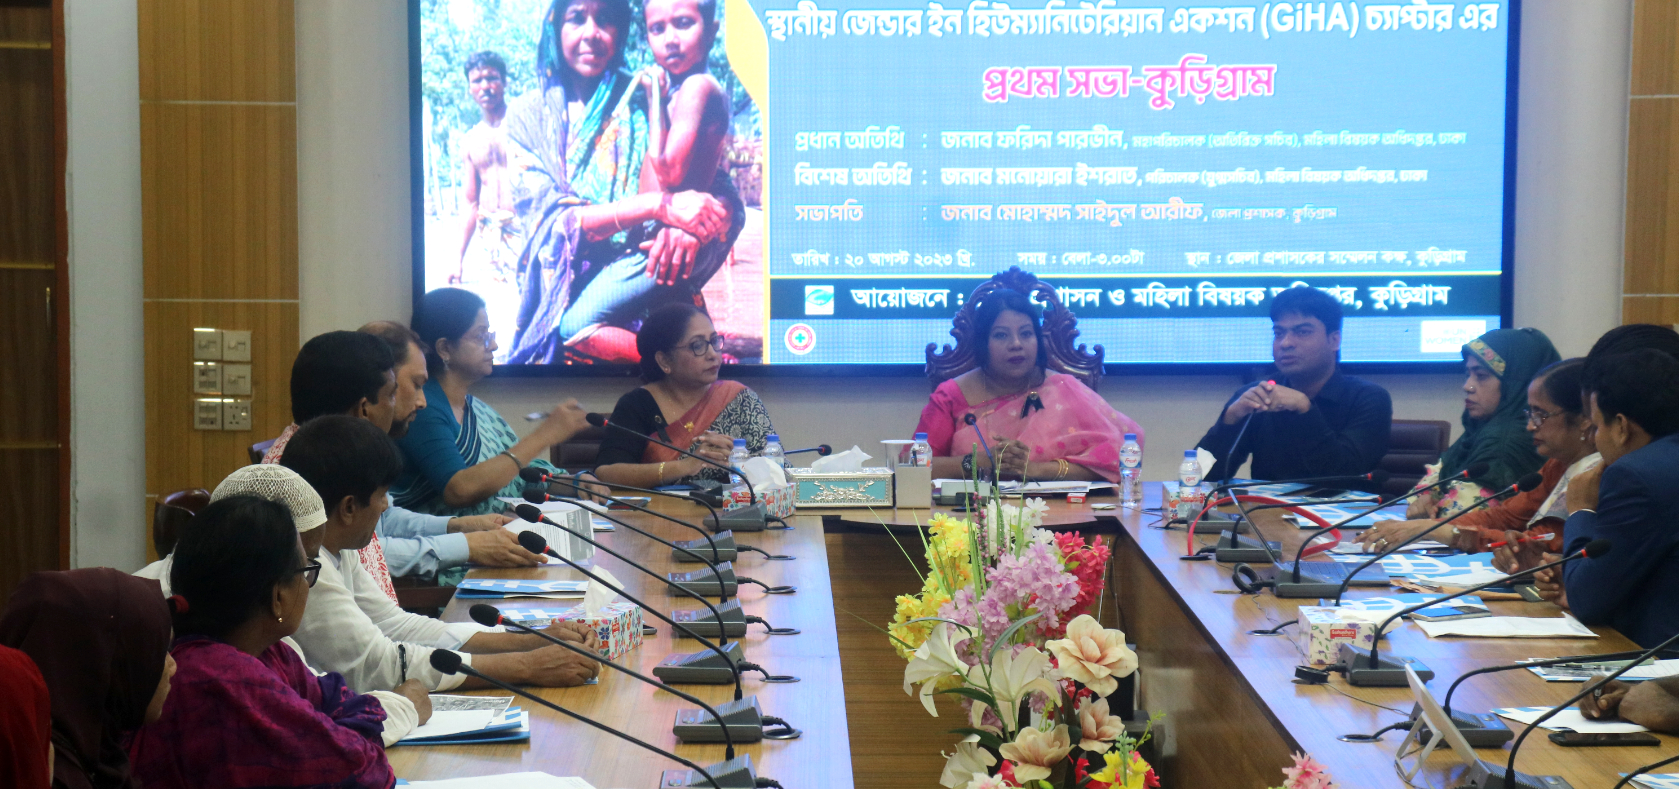 Bangladesh inaugurates its first local chapter on gender in humanitarian action 